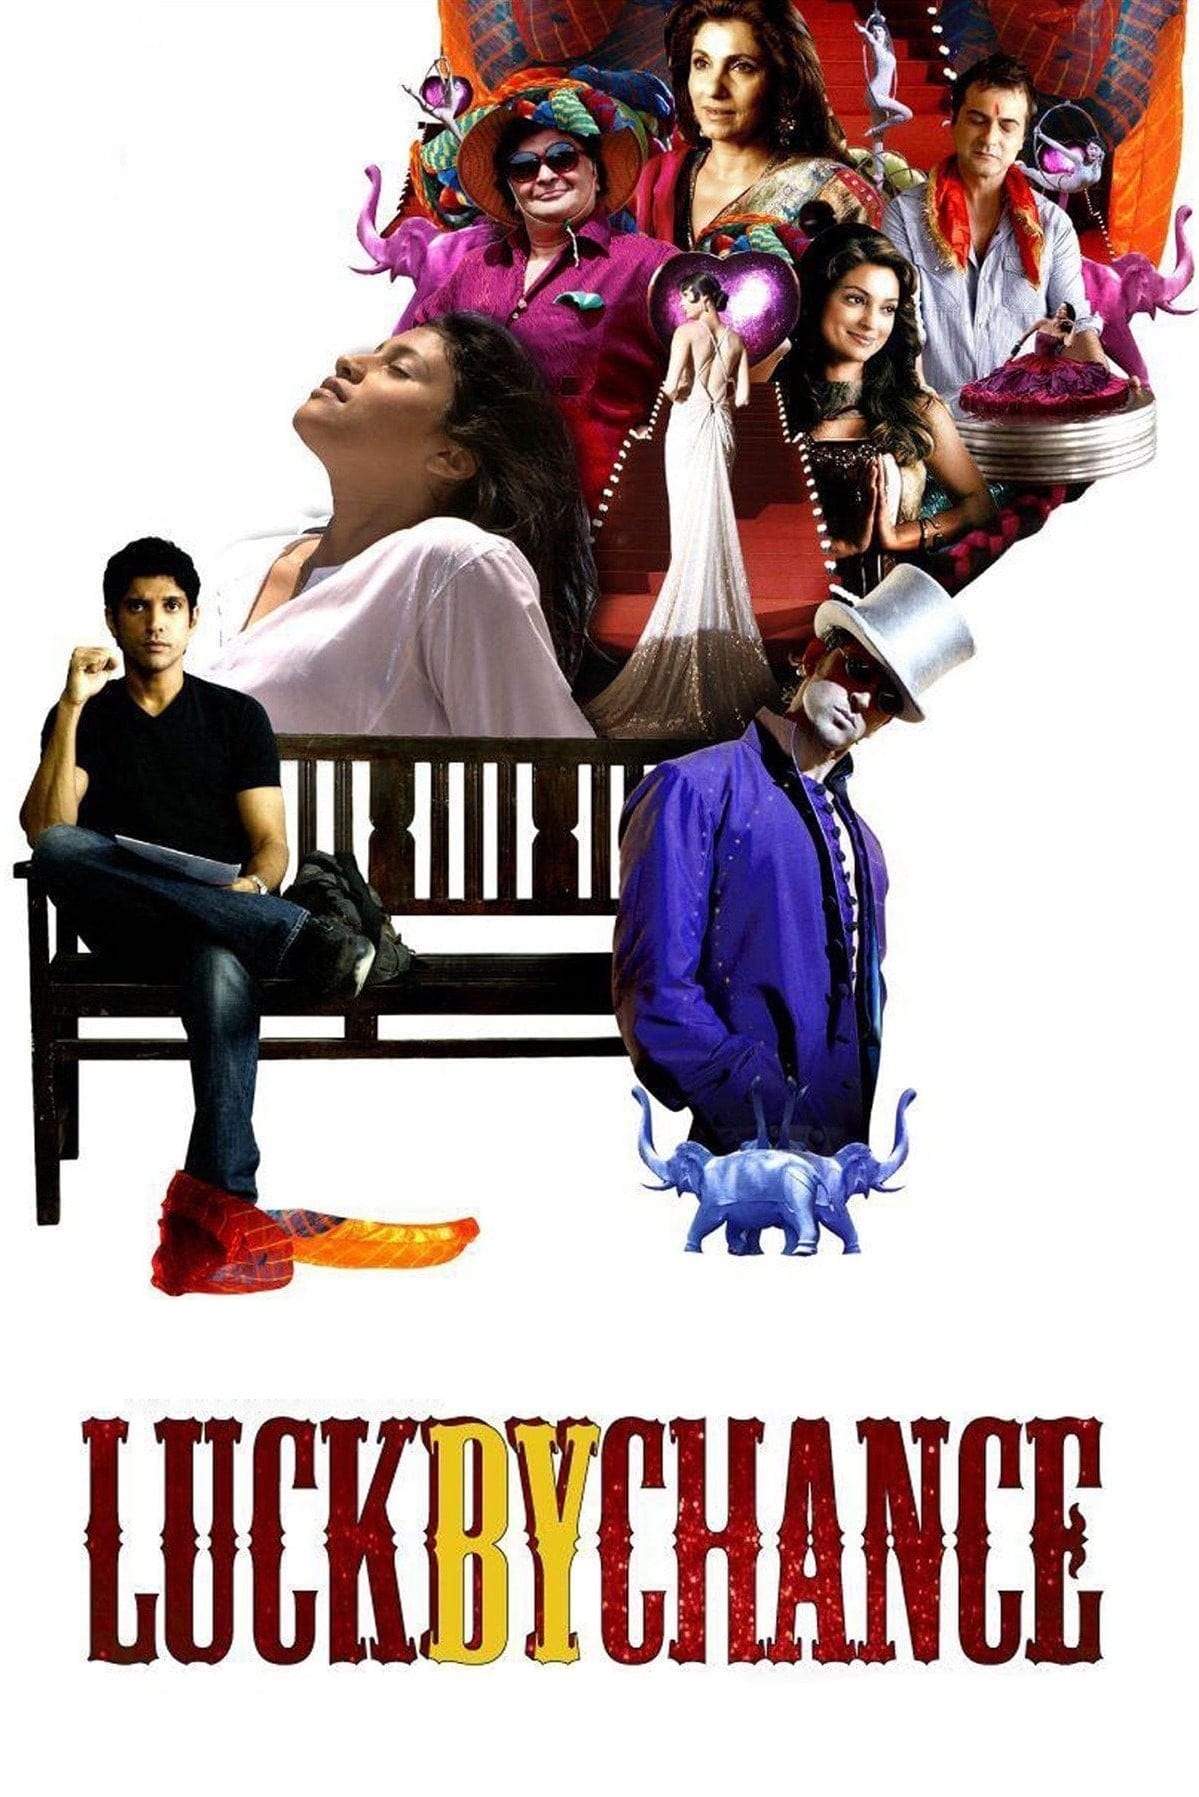 Poster for the movie "Luck by Chance"